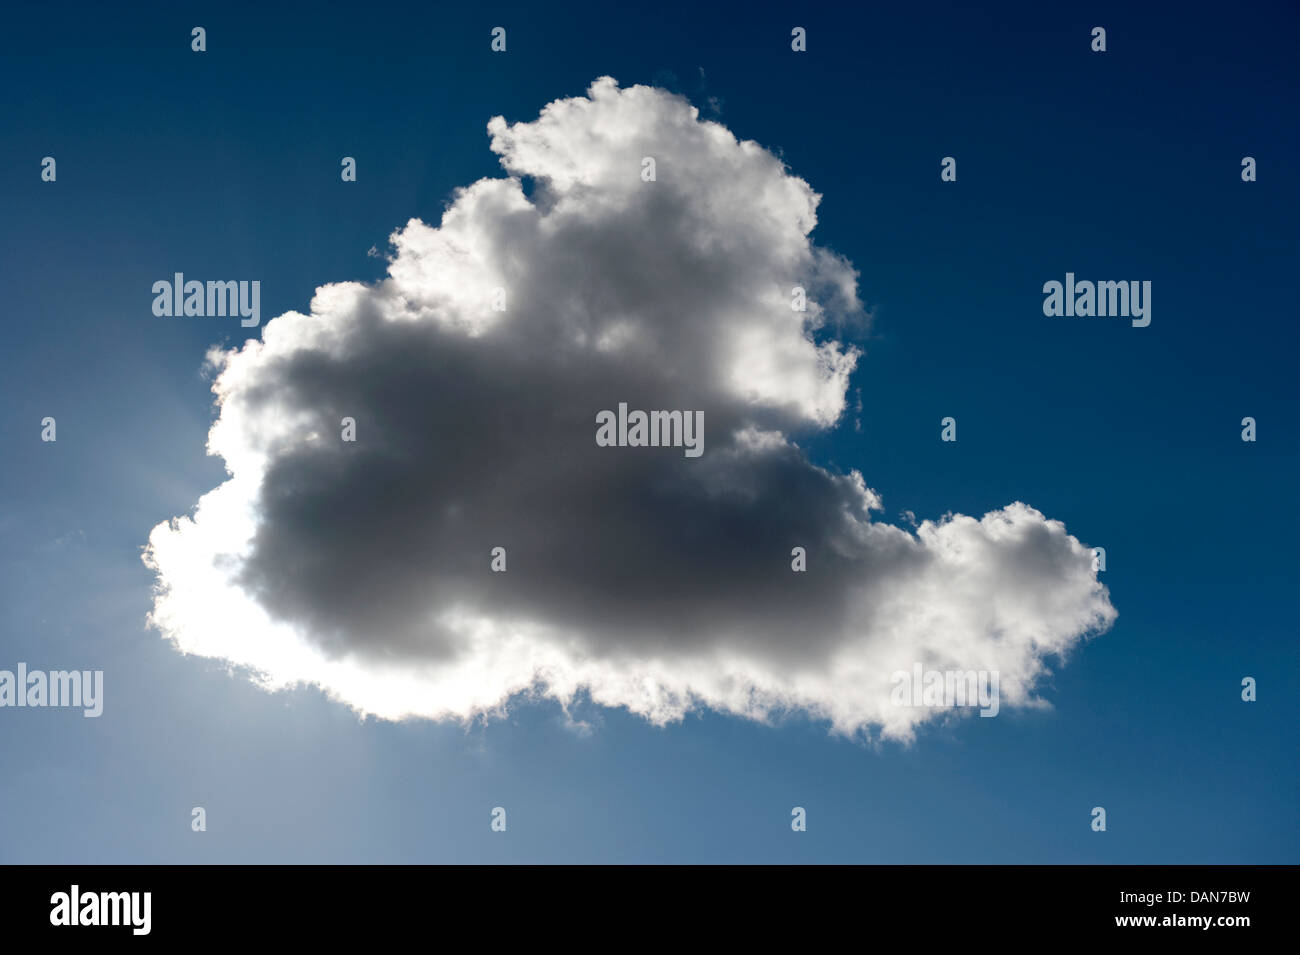 Sun obscured blocked by cloud Depression Stock Photo